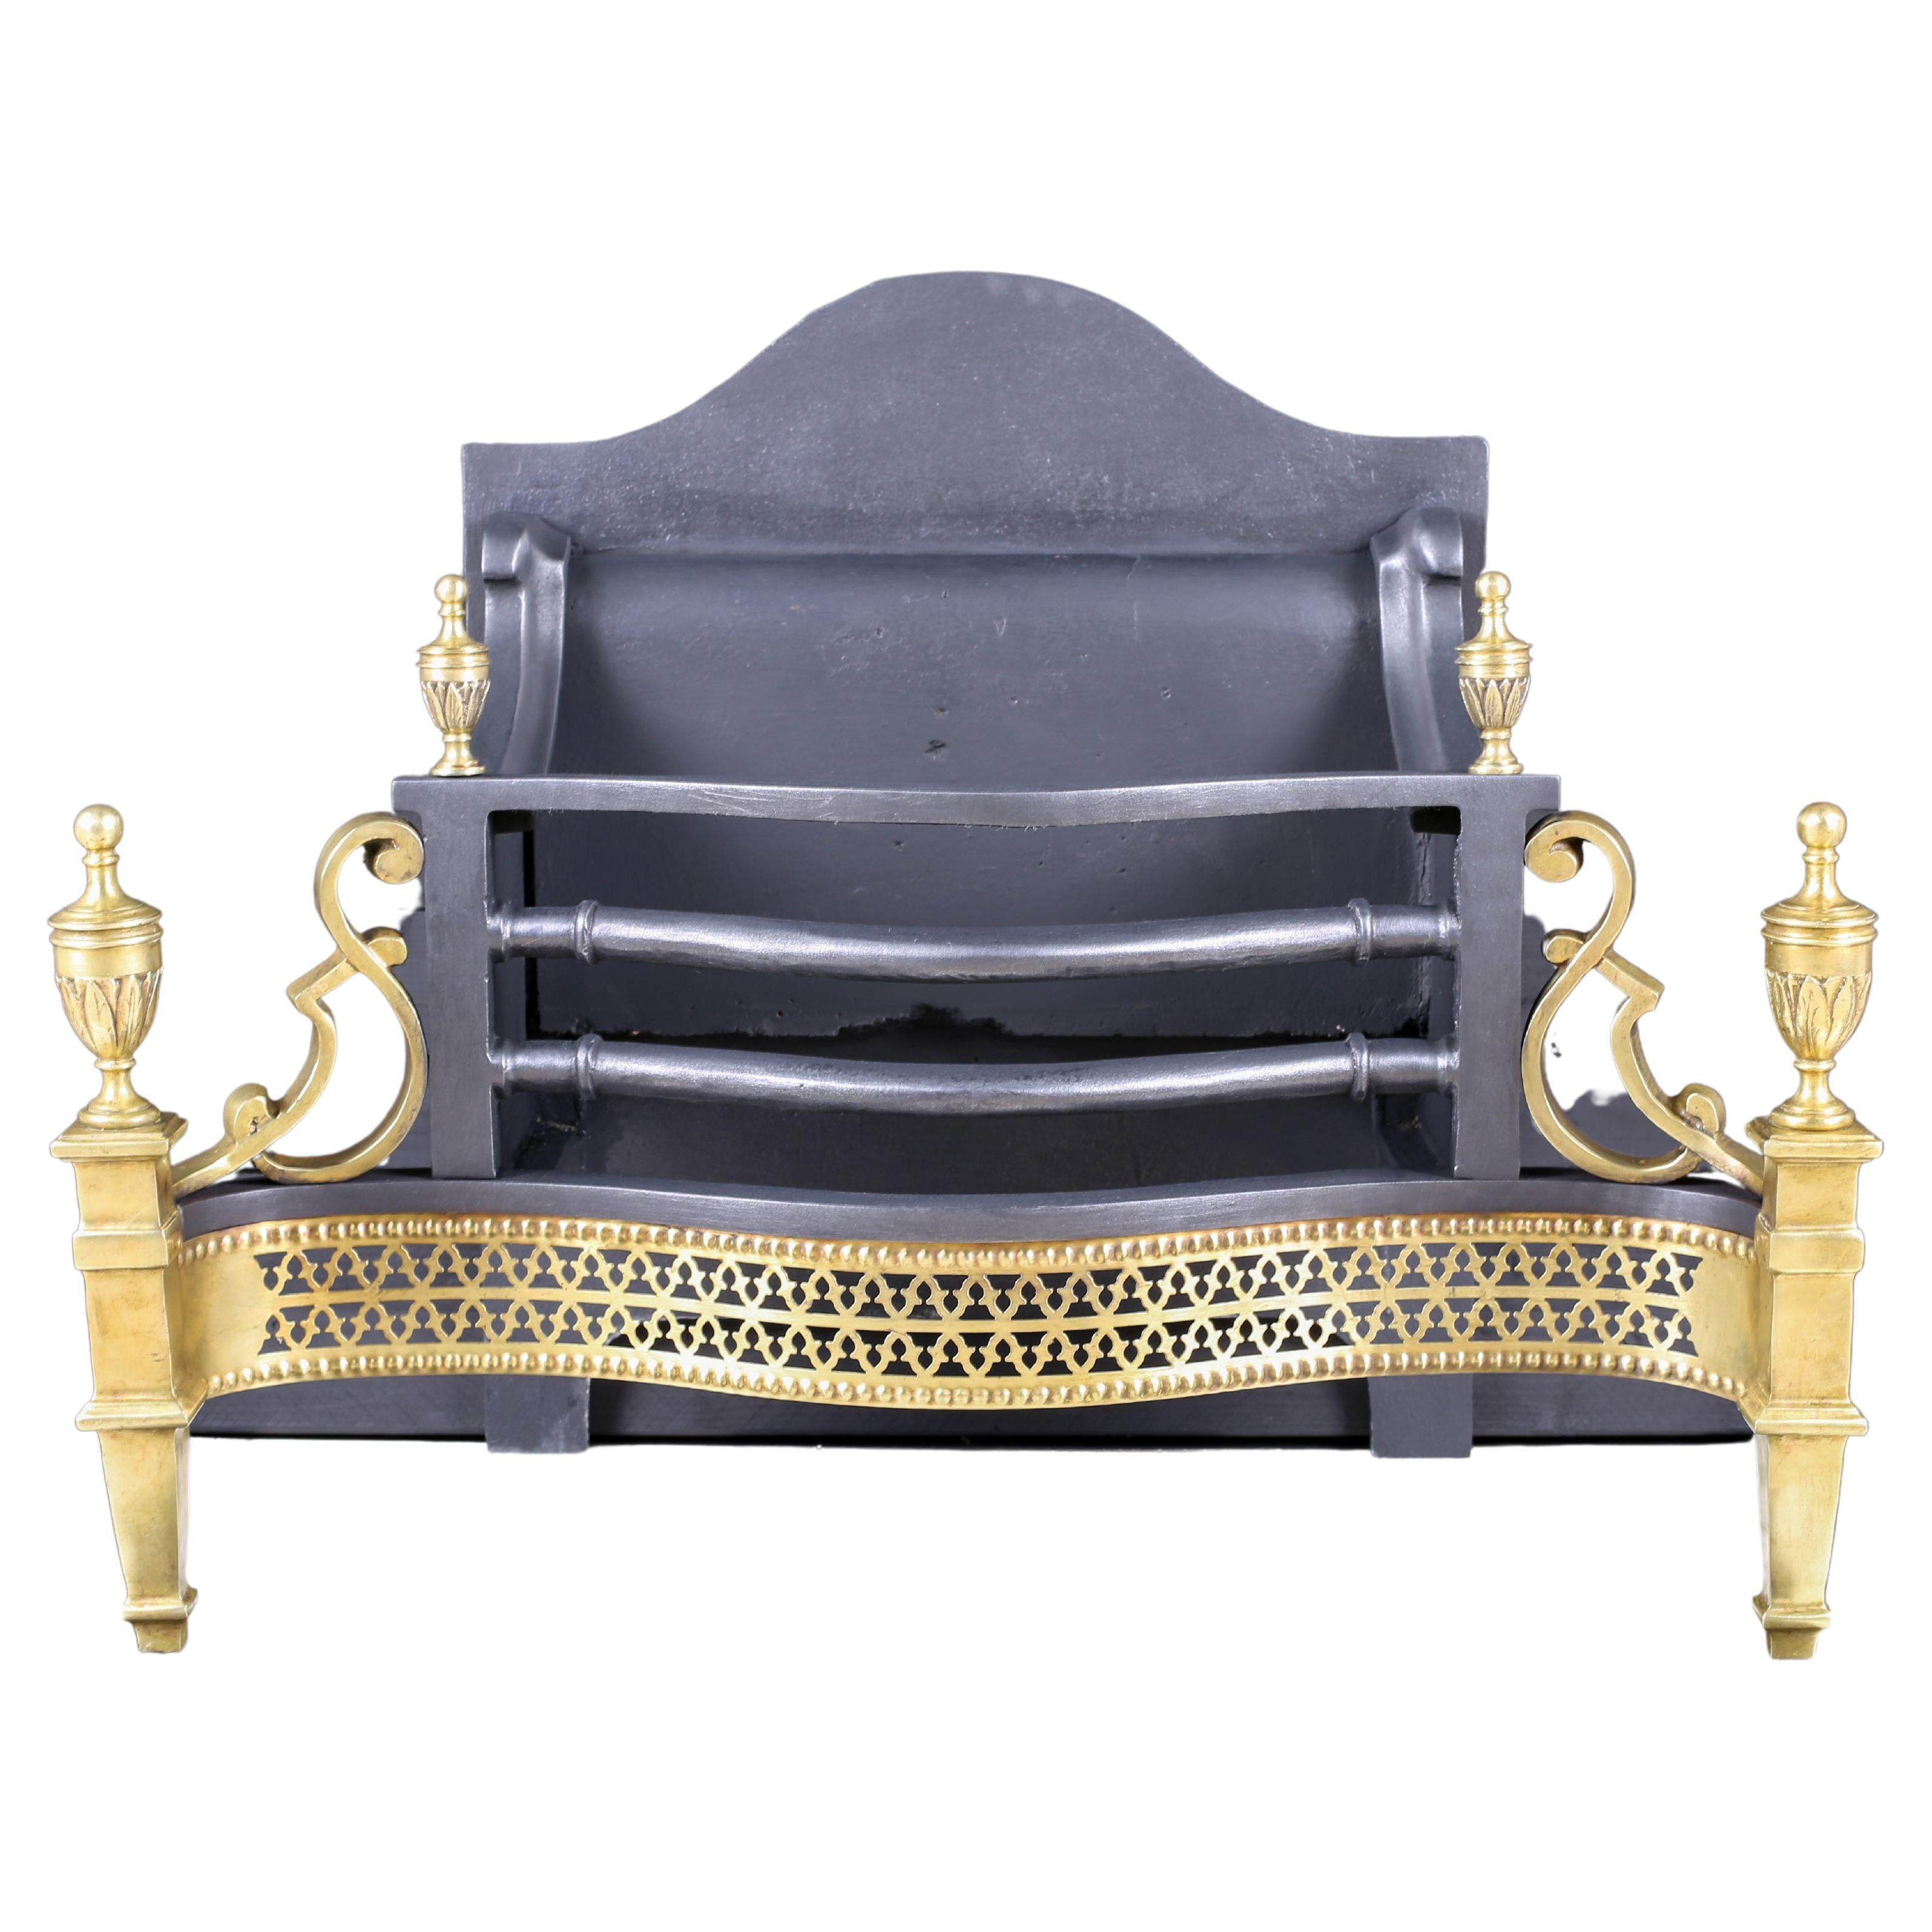 Reclaimed Neoclassical Elegant Cast Iron & Brass Fire Basket Adam Style English For Sale